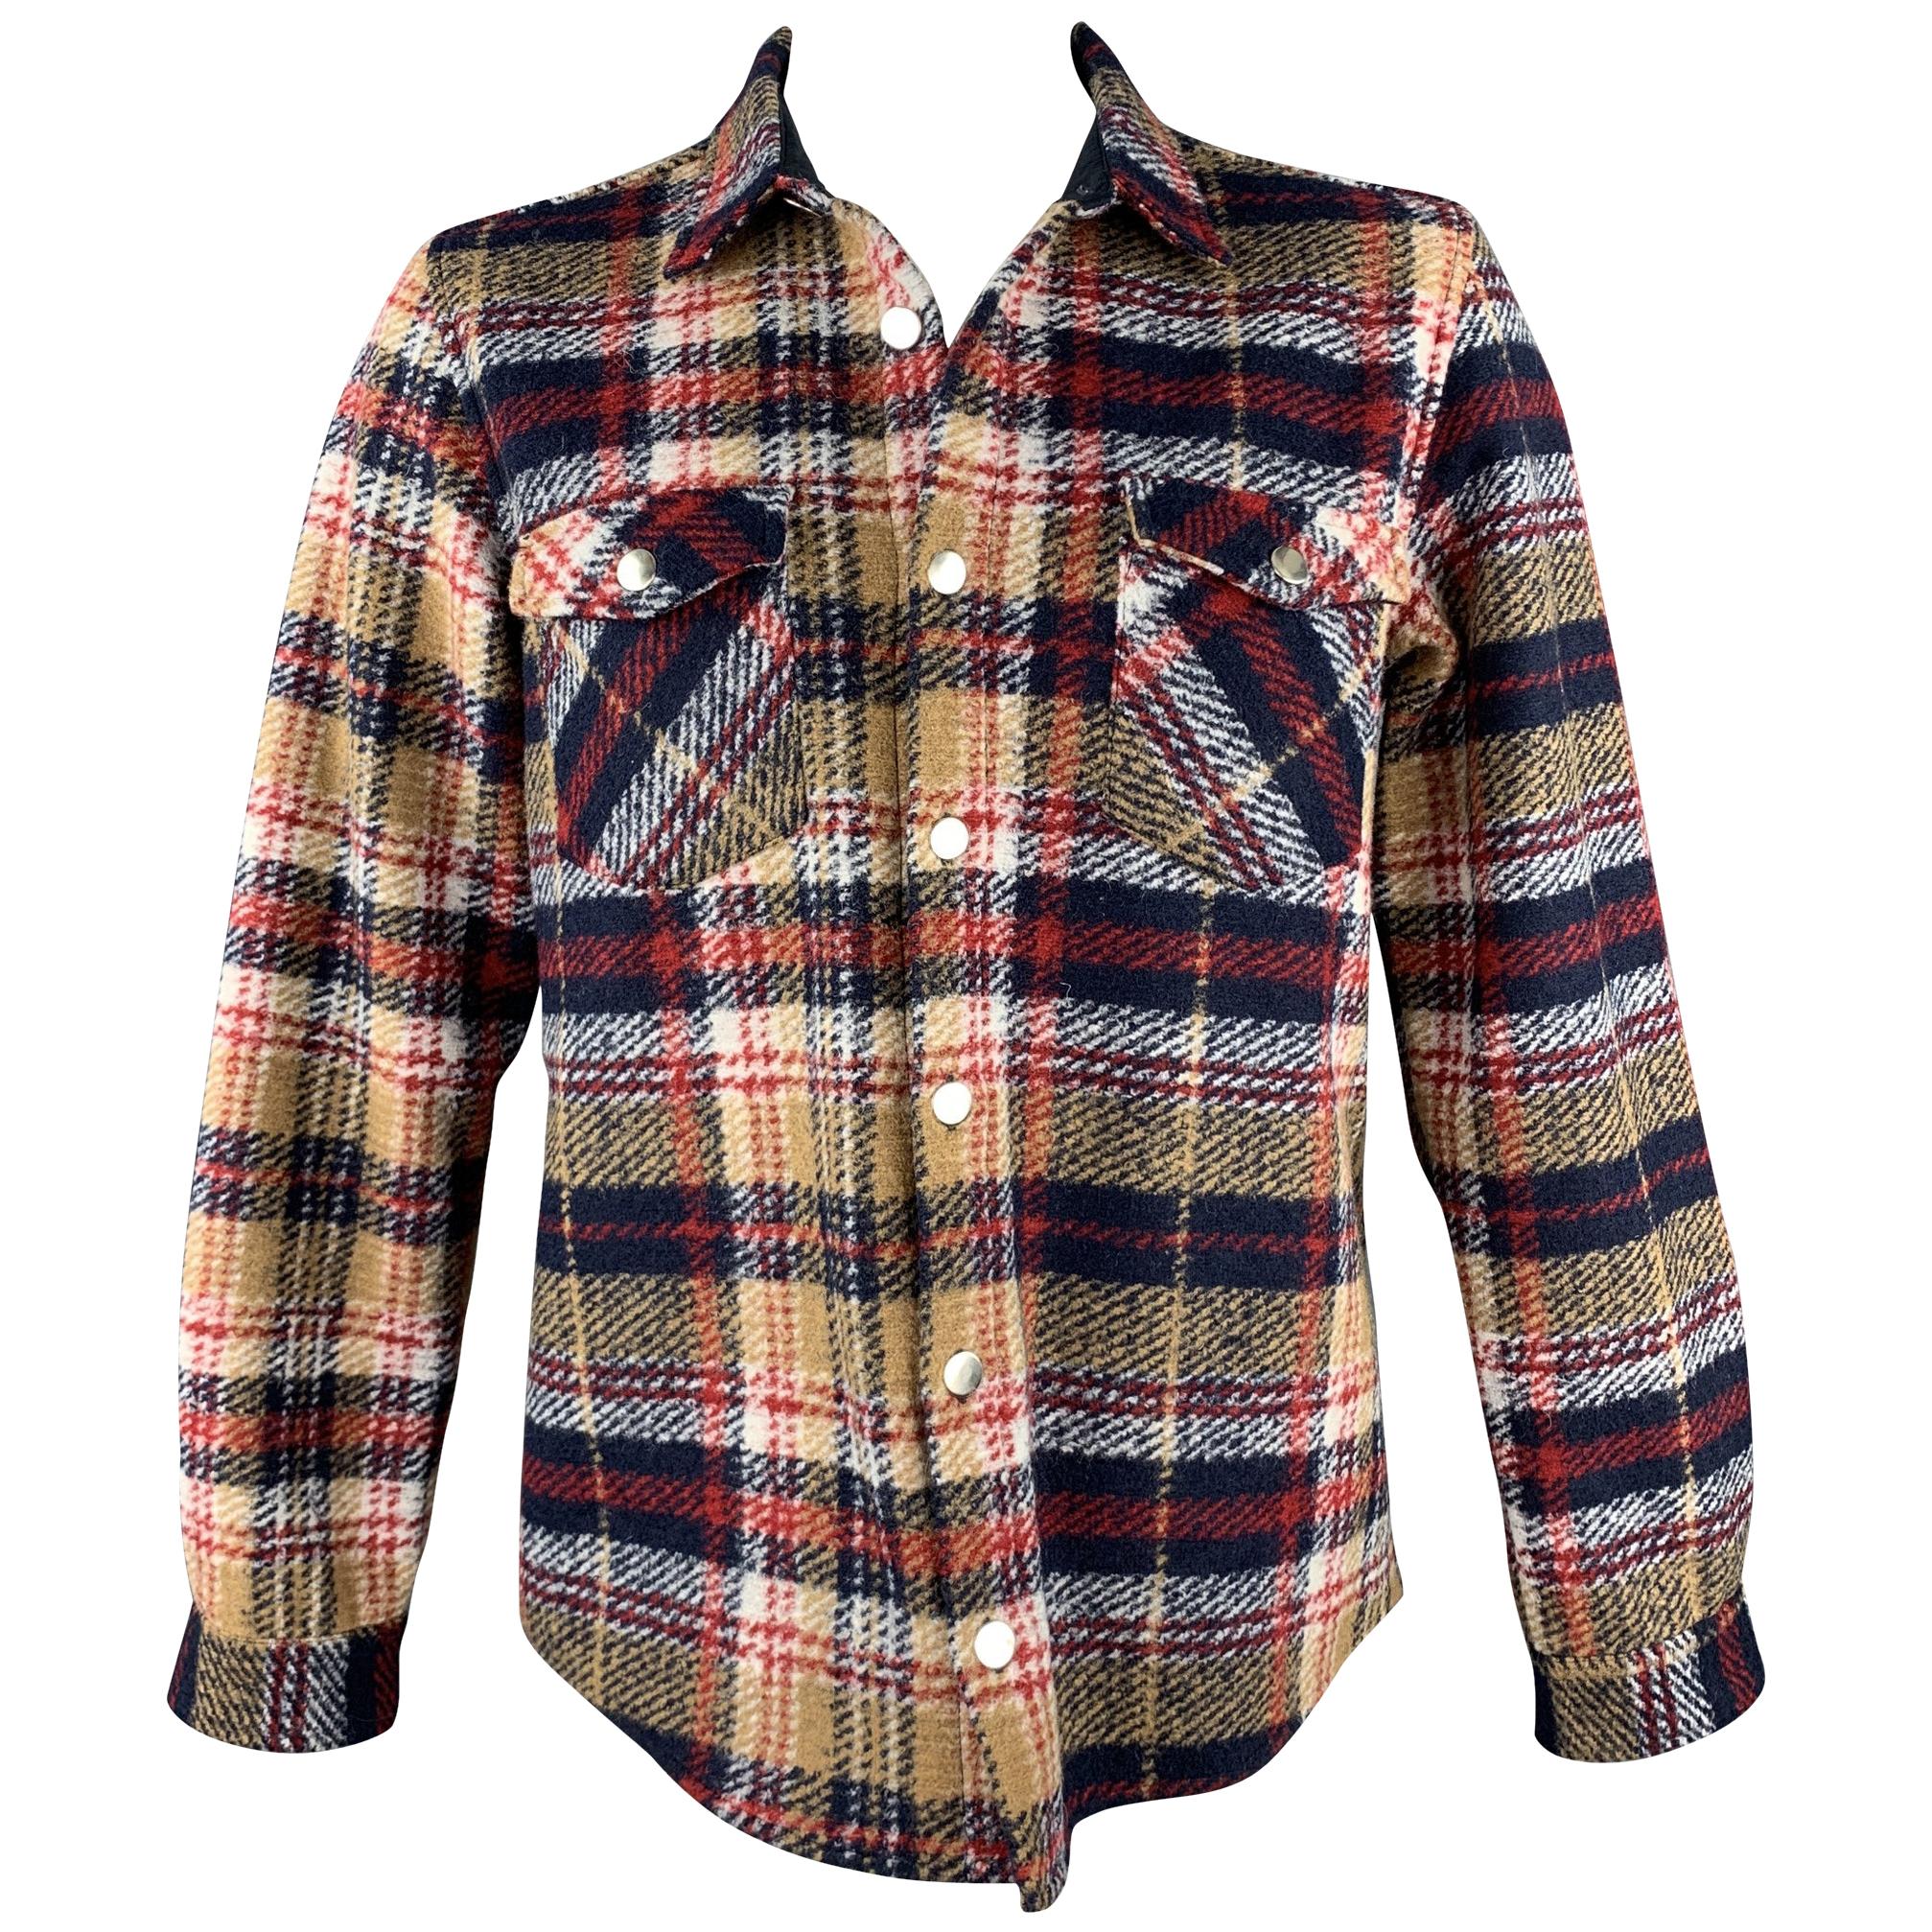 DSQUARED2 Size L Navy & Tan Plaid Wool Patch Pockets Long Sleeve Shirt Jacket